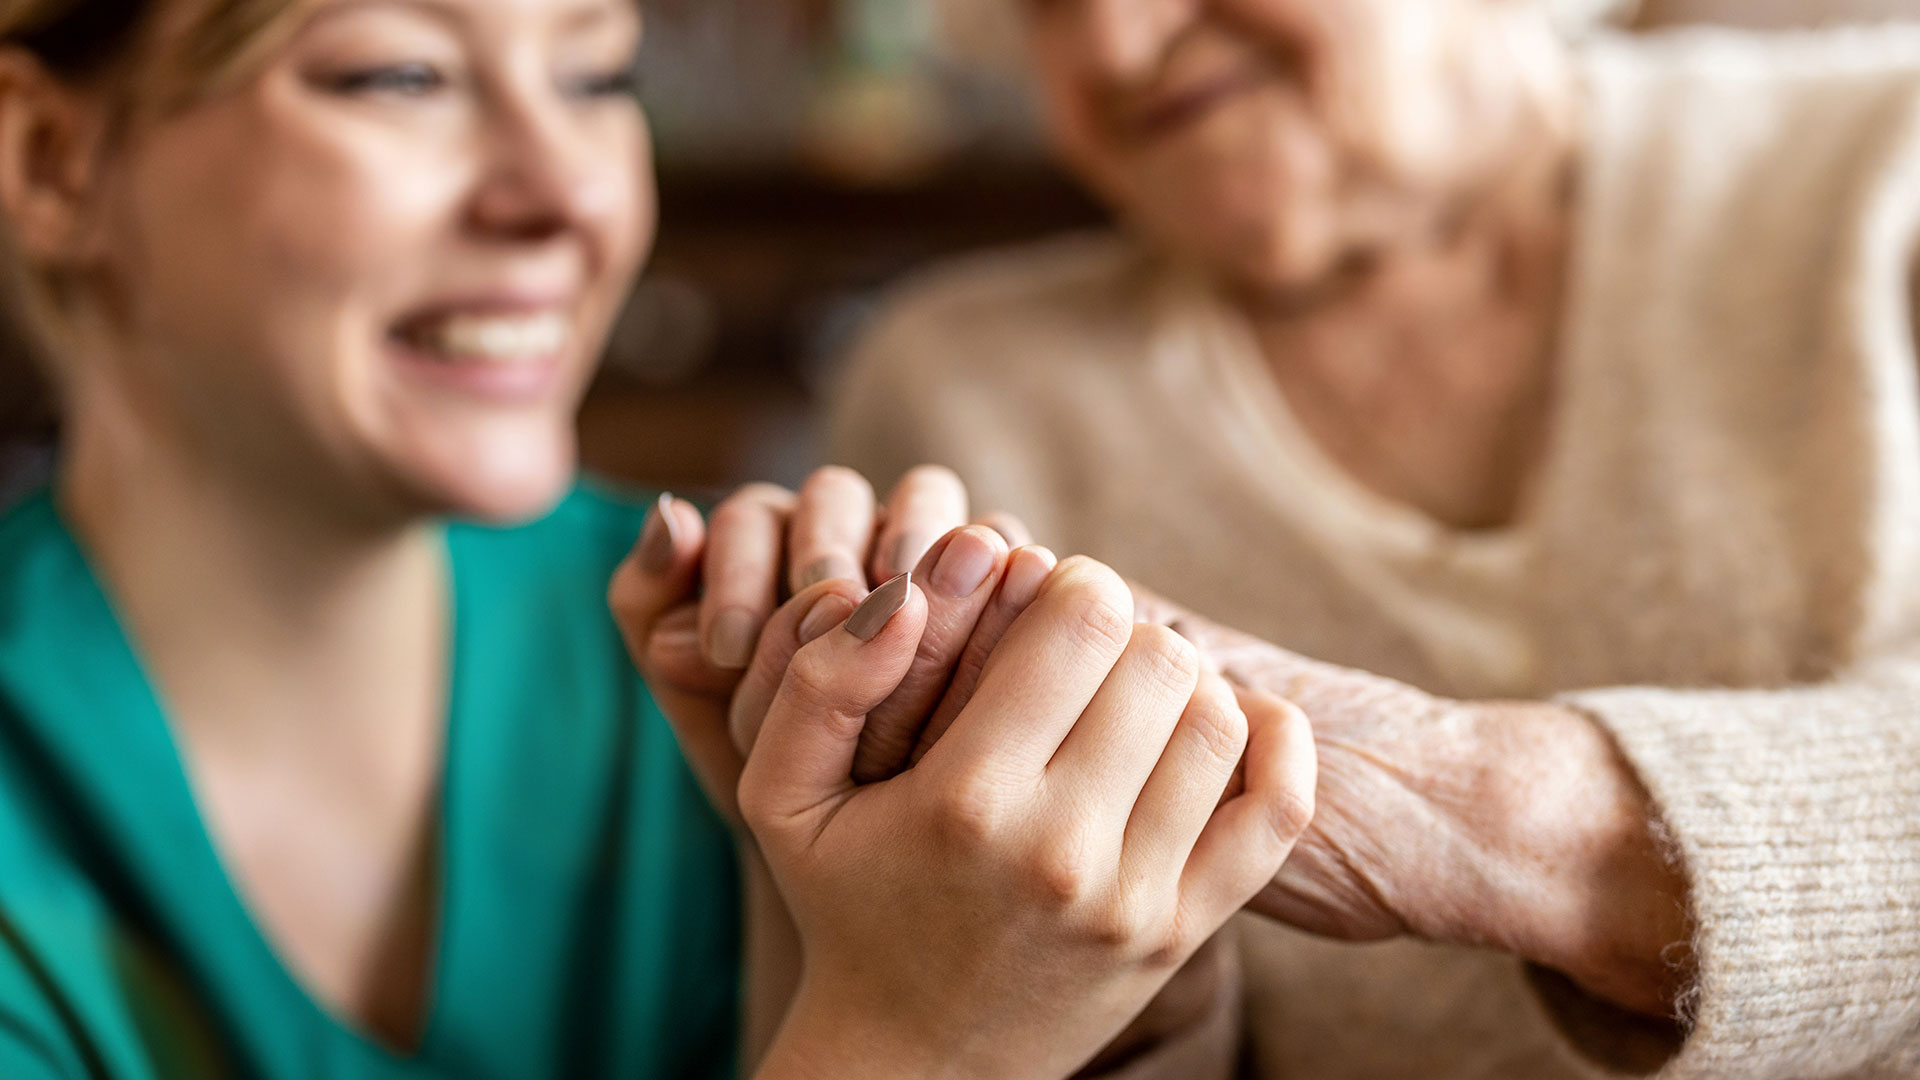 Happy-Valley-Clinic-holding-hands-elderly